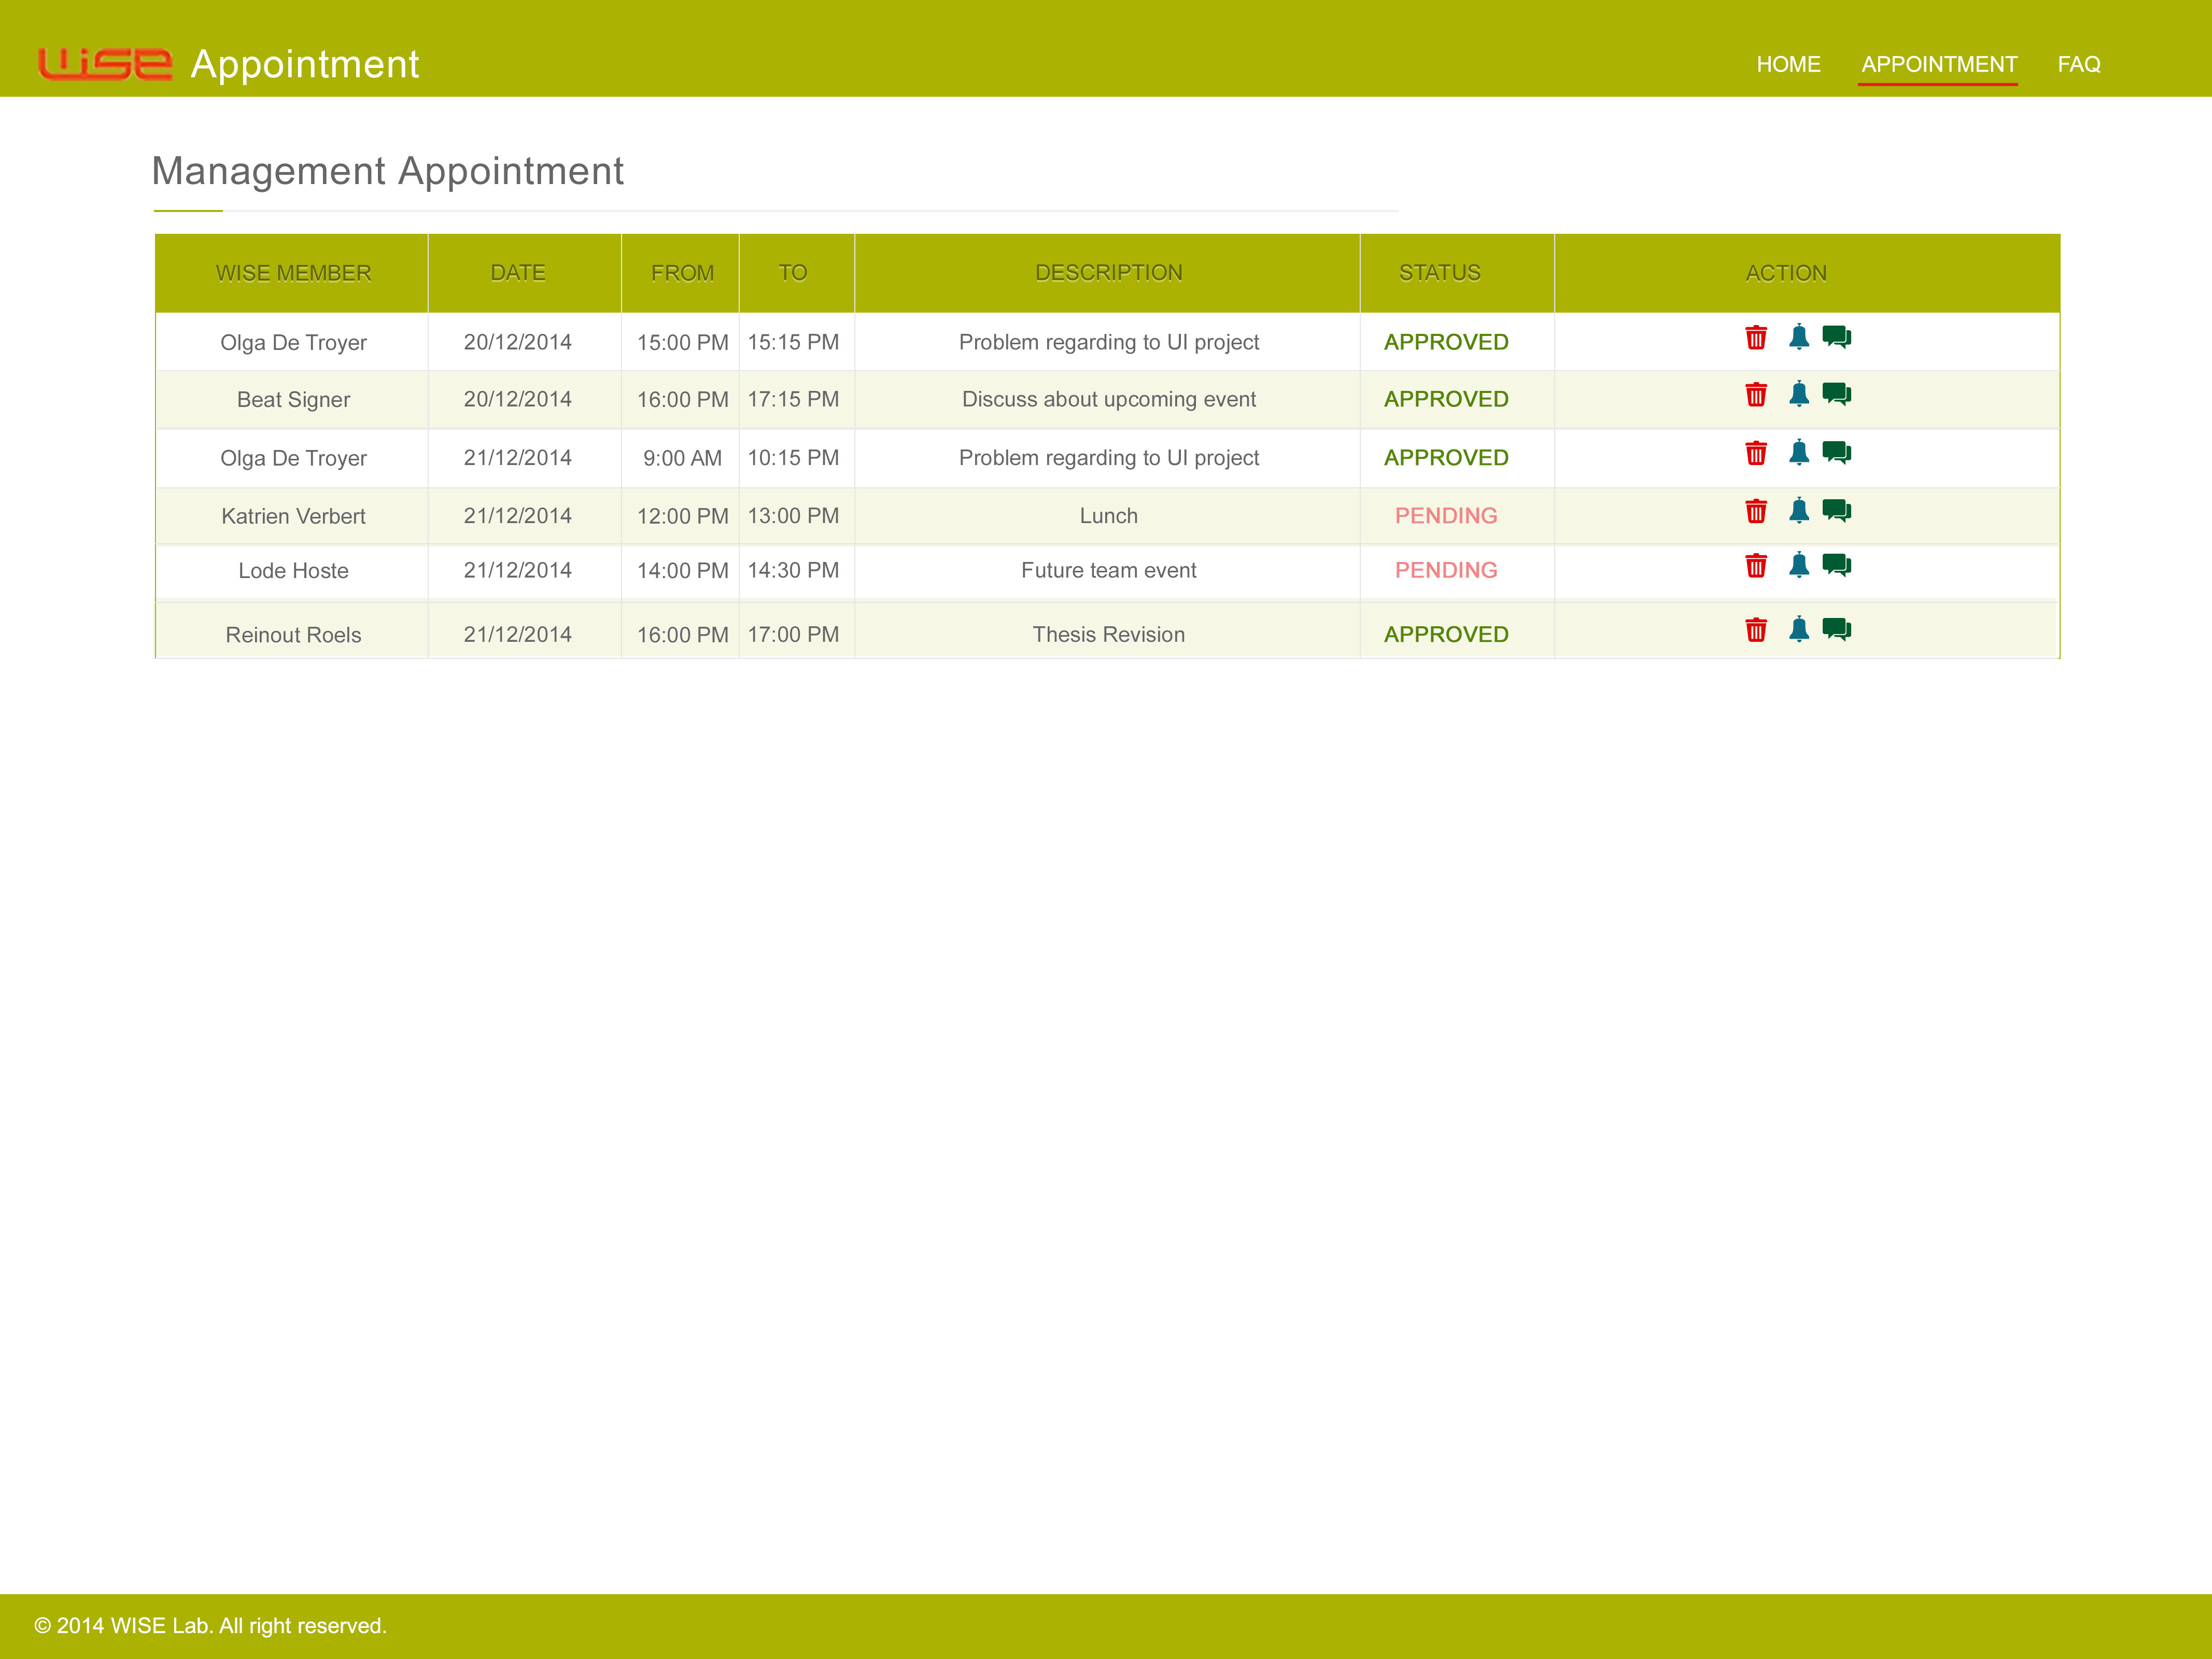 Manage appointment overview